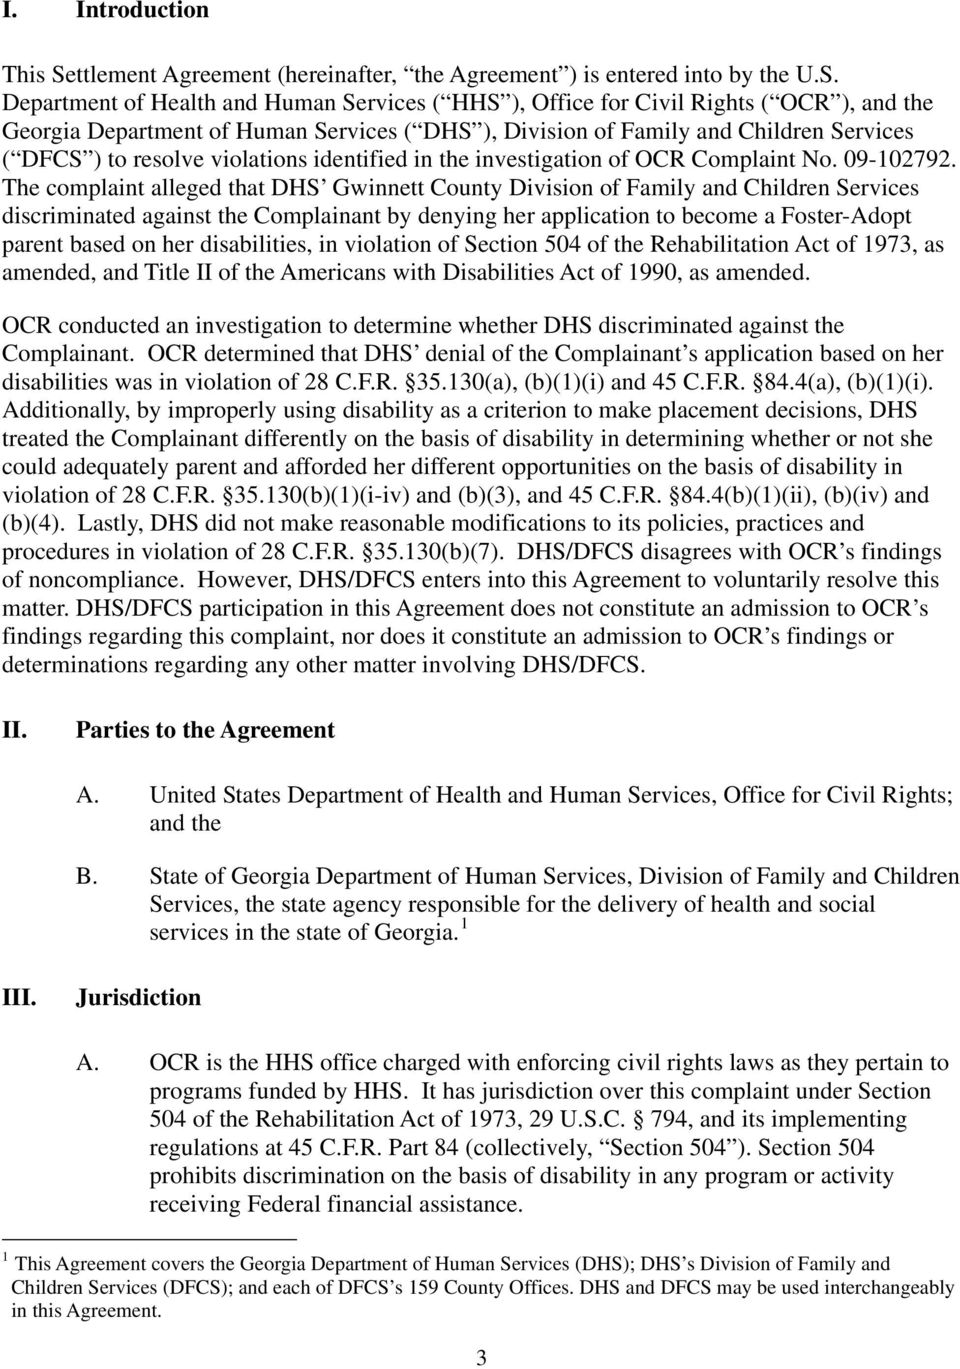 Department of Health and Human Services ( HHS ), Office for Civil Rights ( OCR ), and the Georgia Department of Human Services ( DHS ), Division of Family and Children Services ( DFCS ) to resolve